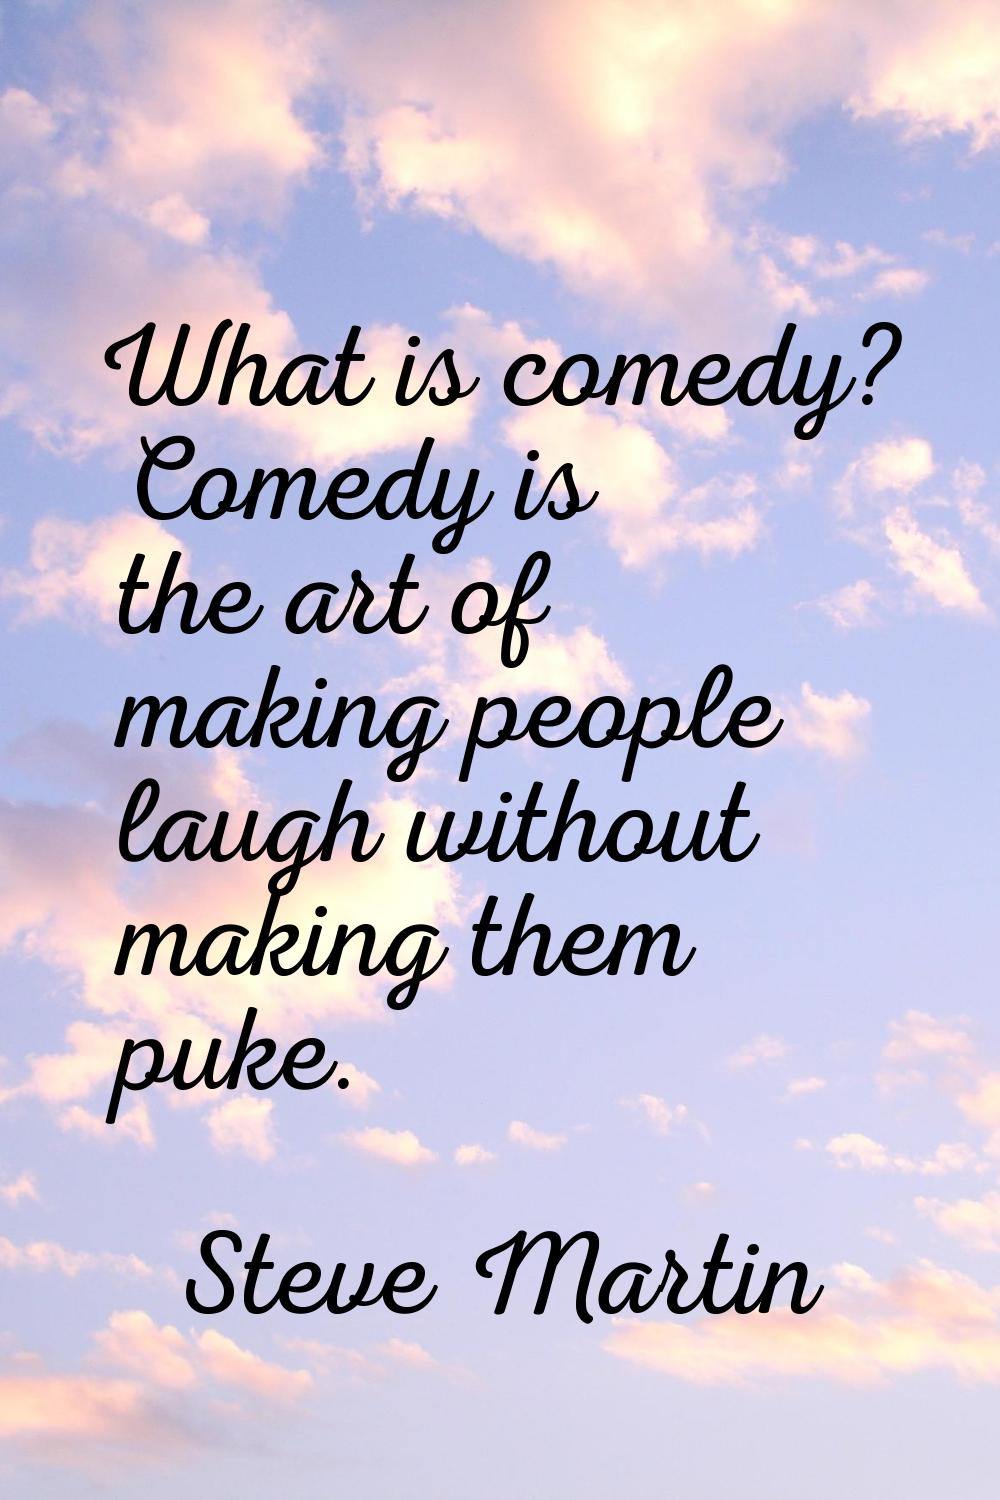 What is comedy? Comedy is the art of making people laugh without making them puke.